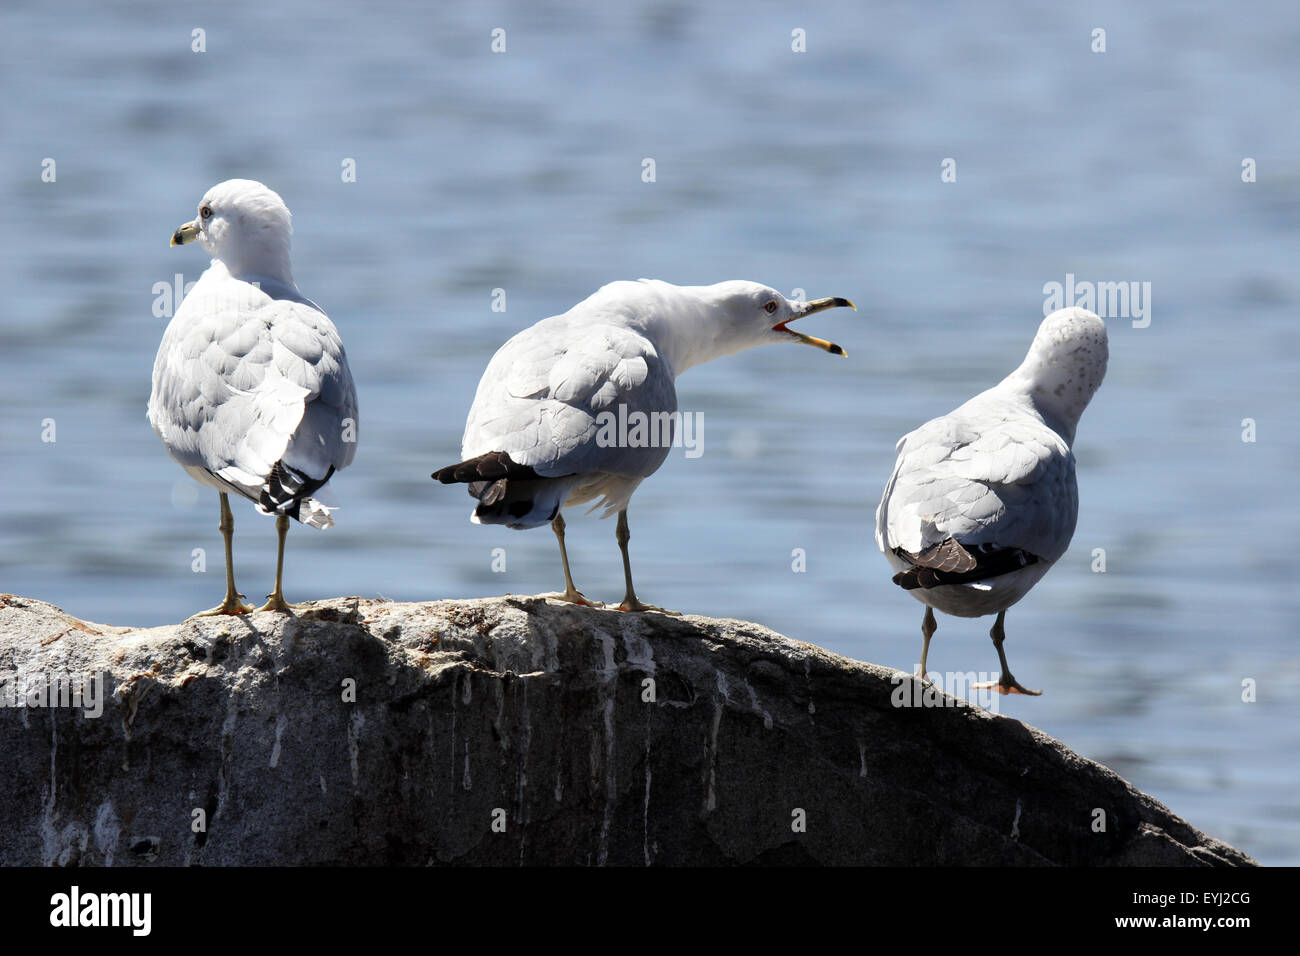 Three seagulls standing on a rock one showing aggressive territorial behavior by squawking. Stock Photo